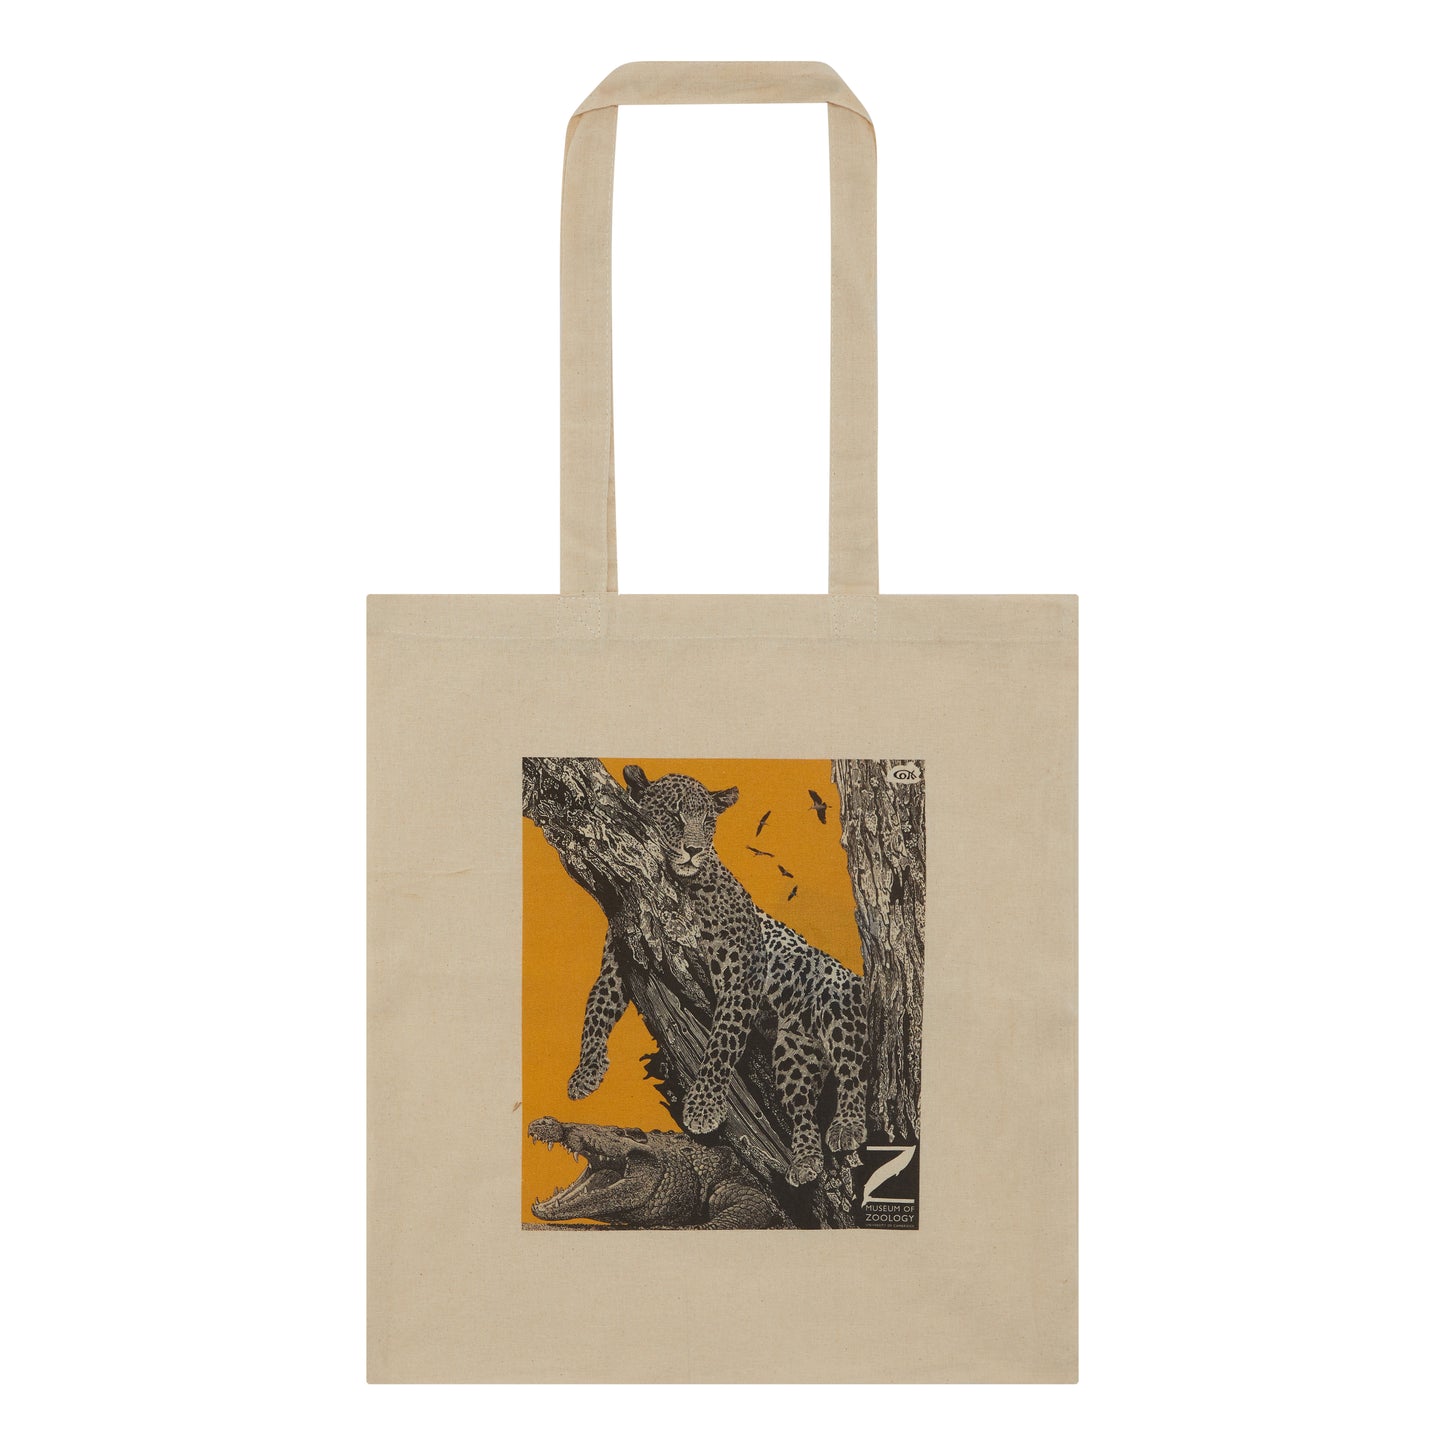 Tote bag, natural cotton with central print of leopard and crocodile against yellow. Museum of Zoology logo bottom right. 